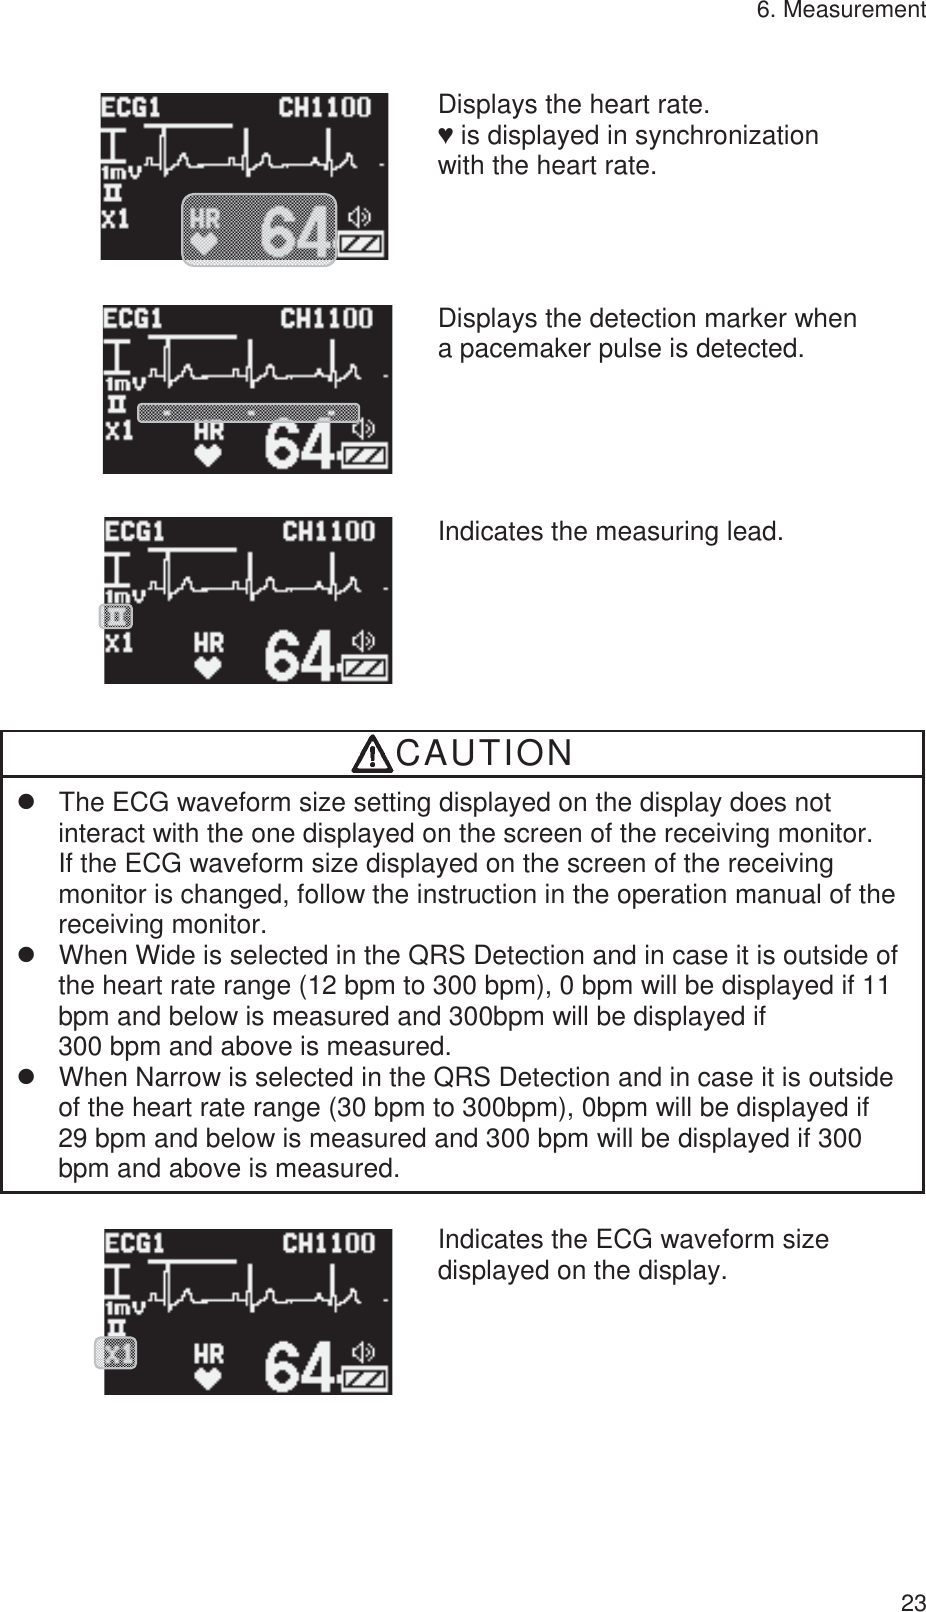 6. Measurement 23        Displays the heart rate.   Ɔ is displayed in synchronization with the heart rate.         Displays the detection marker when a pacemaker pulse is detected.         Indicates the measuring lead.   CAUTION z  The ECG waveform size setting displayed on the display does not interact with the one displayed on the screen of the receiving monitor. If the ECG waveform size displayed on the screen of the receiving monitor is changed, follow the instruction in the operation manual of the receiving monitor. z  When Wide is selected in the QRS Detection and in case it is outside of the heart rate range (12 bpm to 300 bpm), 0 bpm will be displayed if 11 bpm and below is measured and 300bpm will be displayed if   300 bpm and above is measured. z  When Narrow is selected in the QRS Detection and in case it is outside of the heart rate range (30 bpm to 300bpm), 0bpm will be displayed if 29 bpm and below is measured and 300 bpm will be displayed if 300 bpm and above is measured.         Indicates the ECG waveform size displayed on the display.   